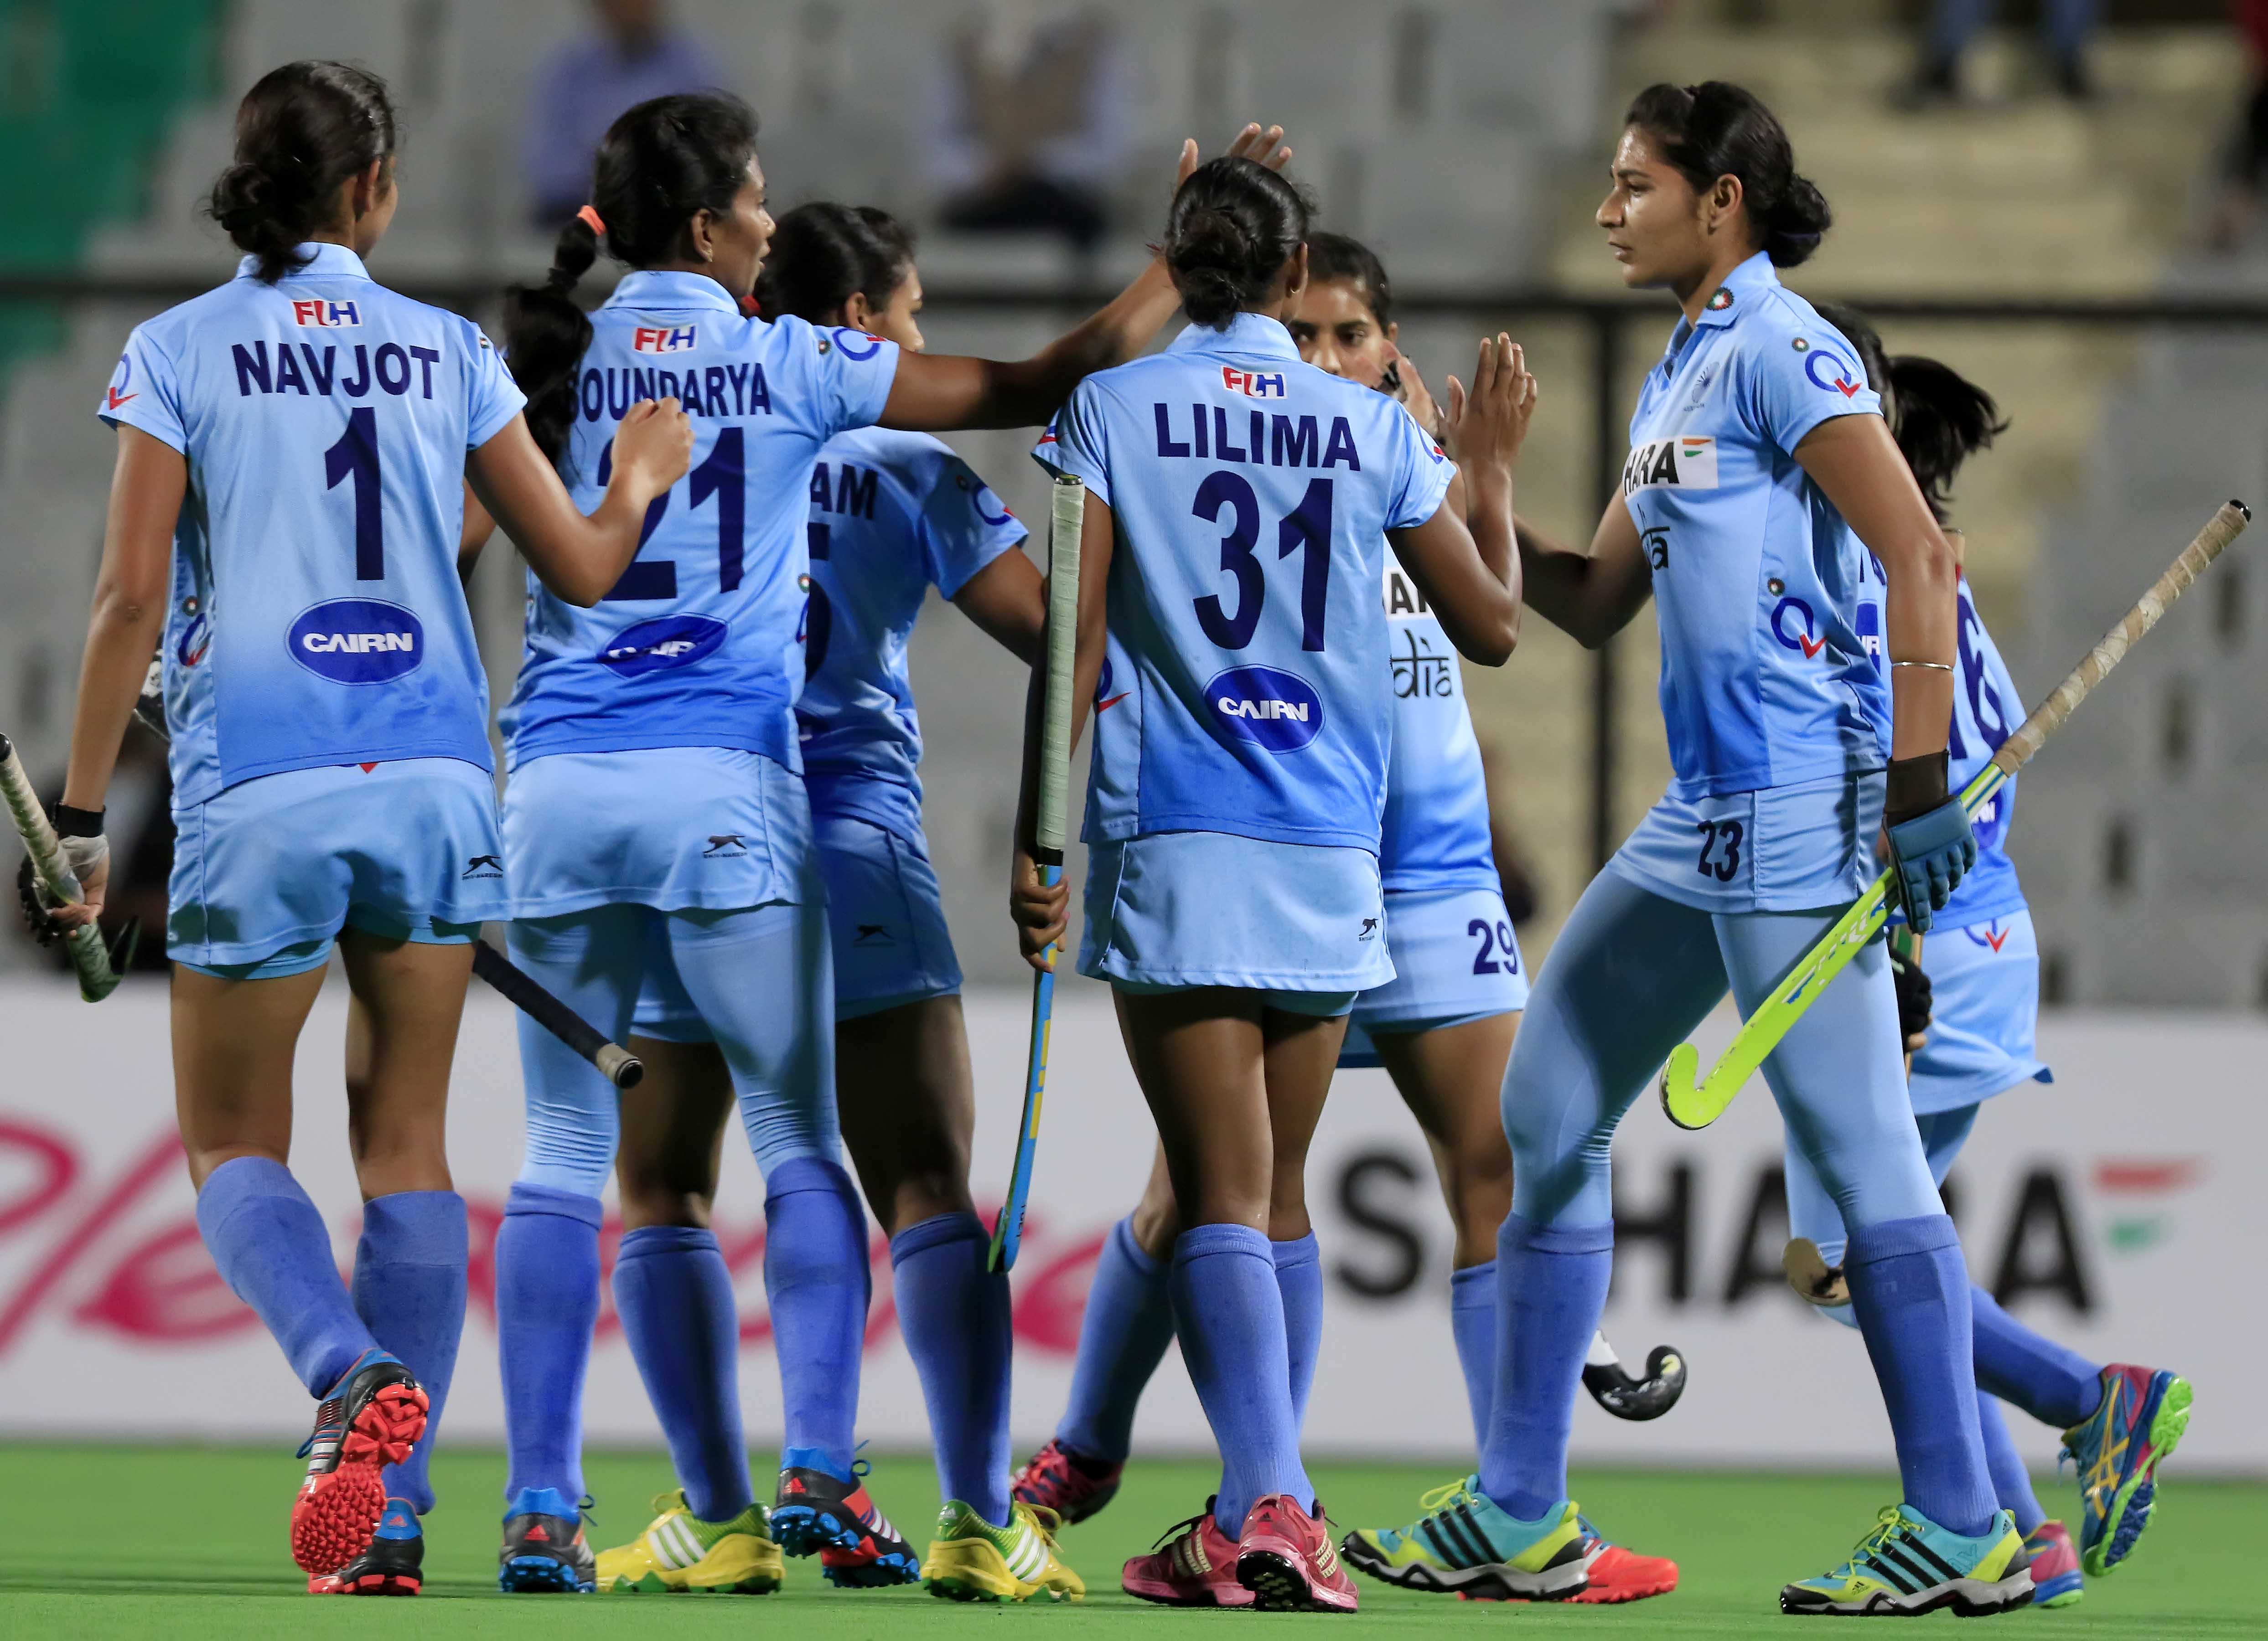 Indian women's hockey team to play 2016 rio games